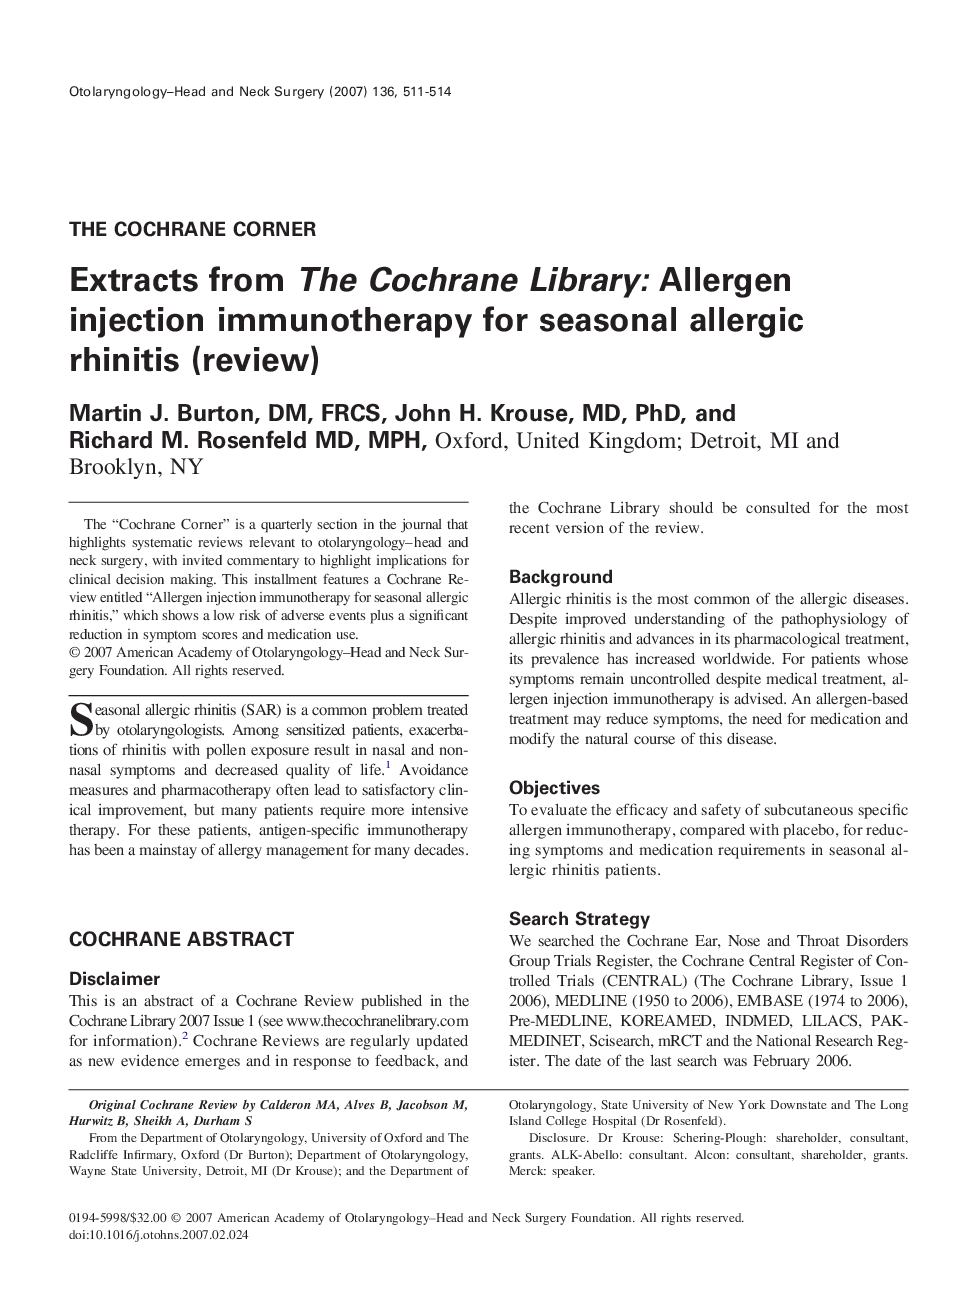 Extracts from The Cochrane Library: Allergen injection immunotherapy for seasonal allergic rhinitis (review)